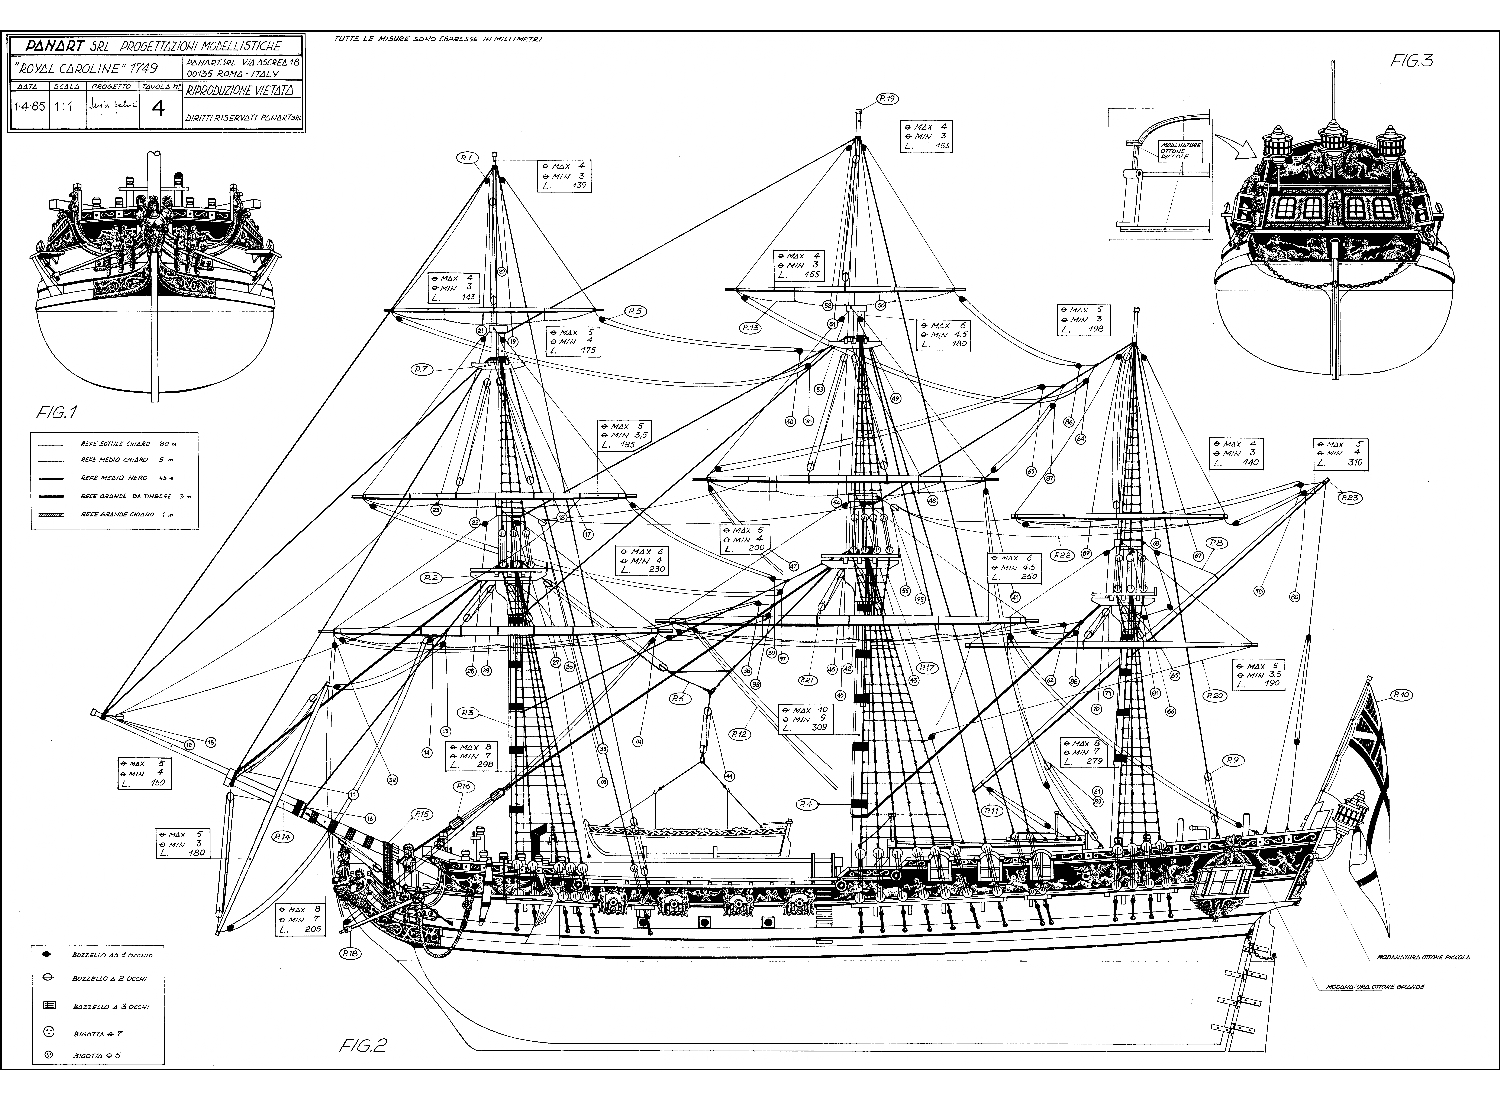 wooden model builder: plans and drawings